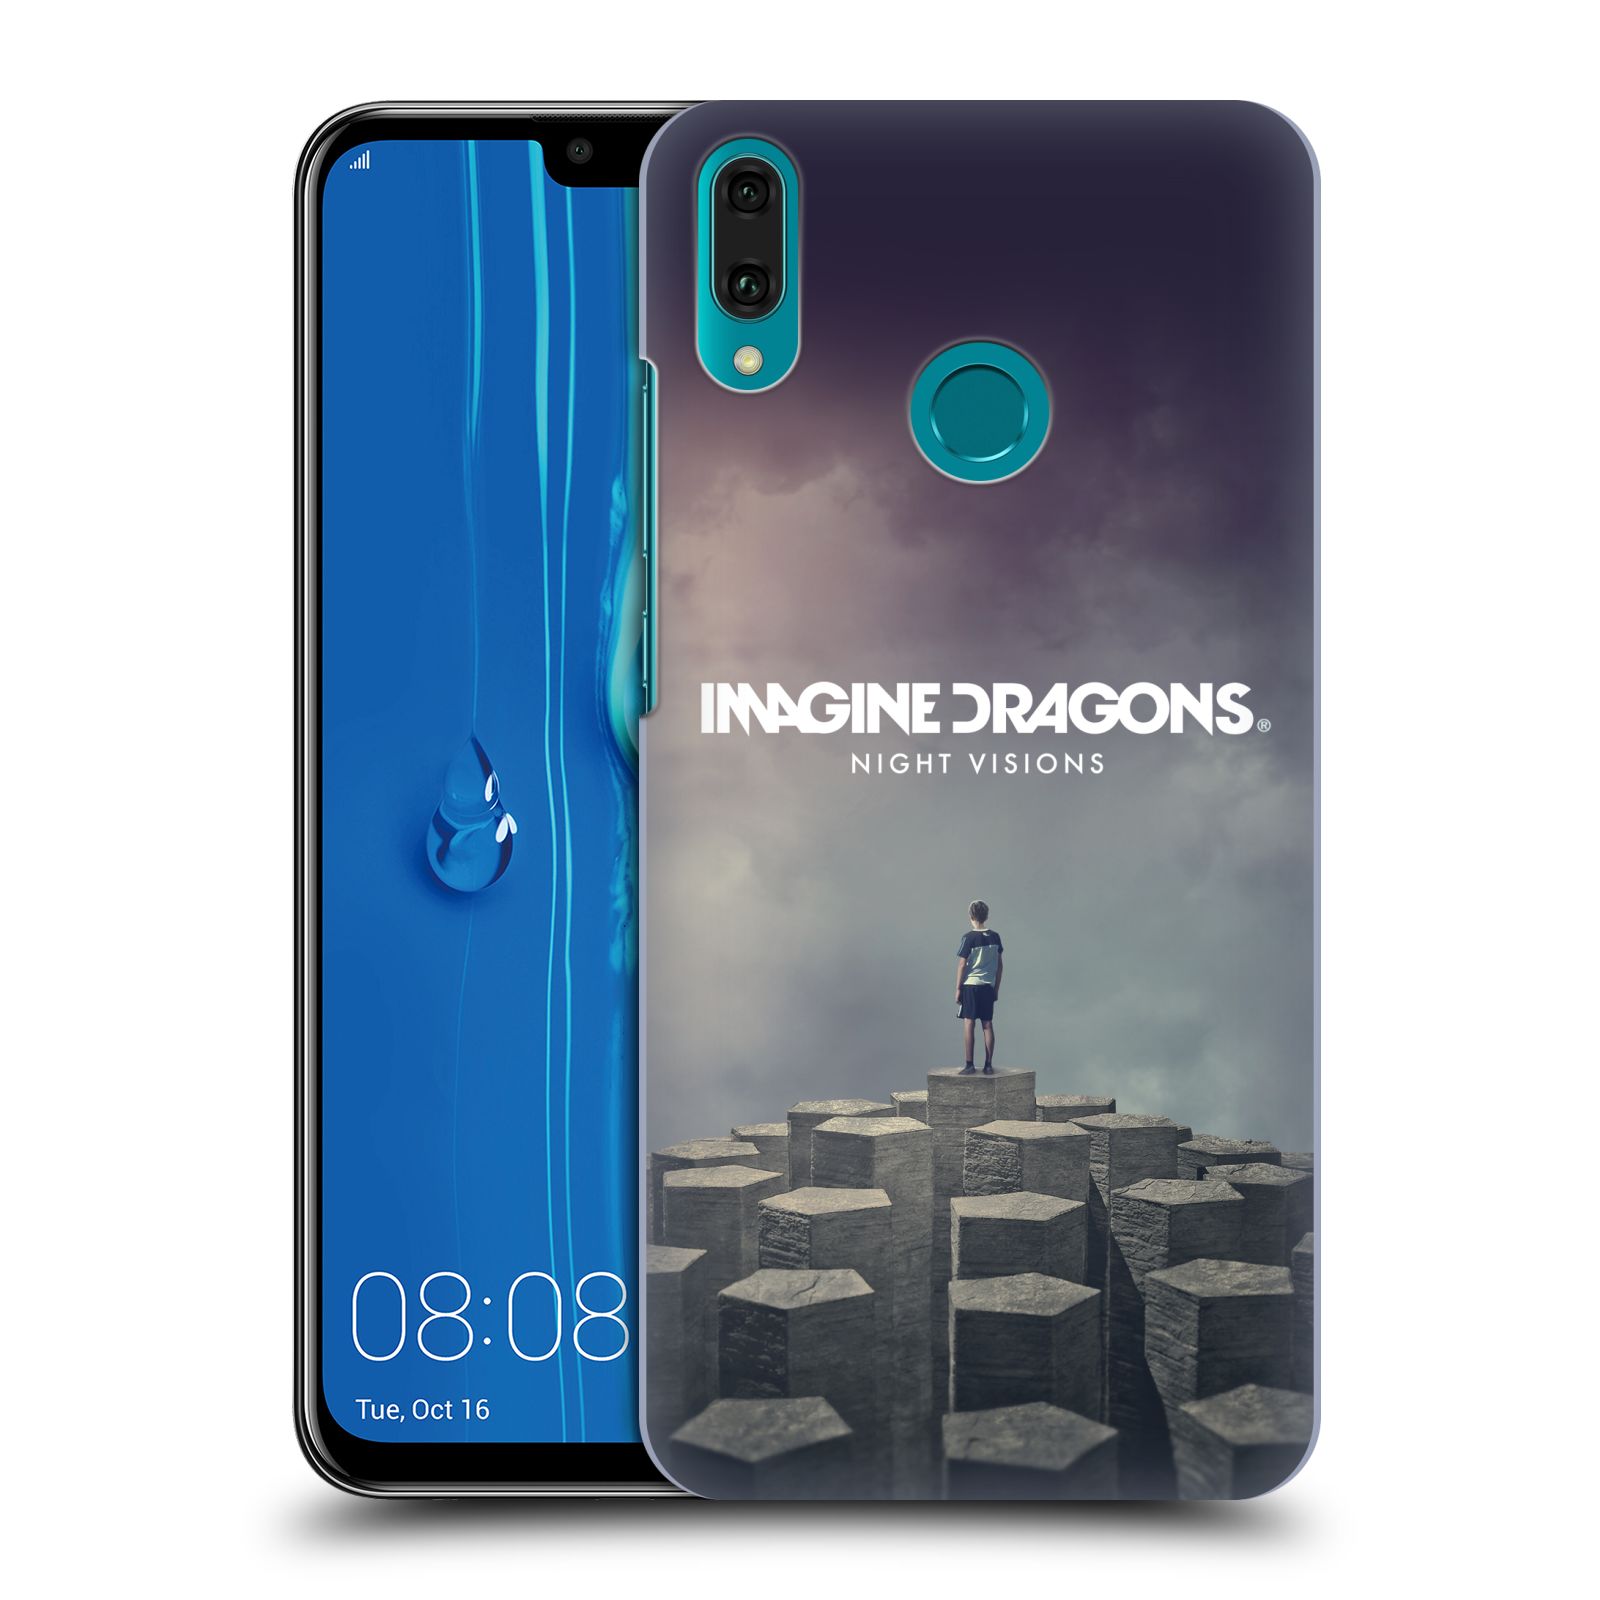 Pouzdro na mobil Huawei Y9 2019 - HEAD CASE - hudební skupina Imagine Dragons Night Visions